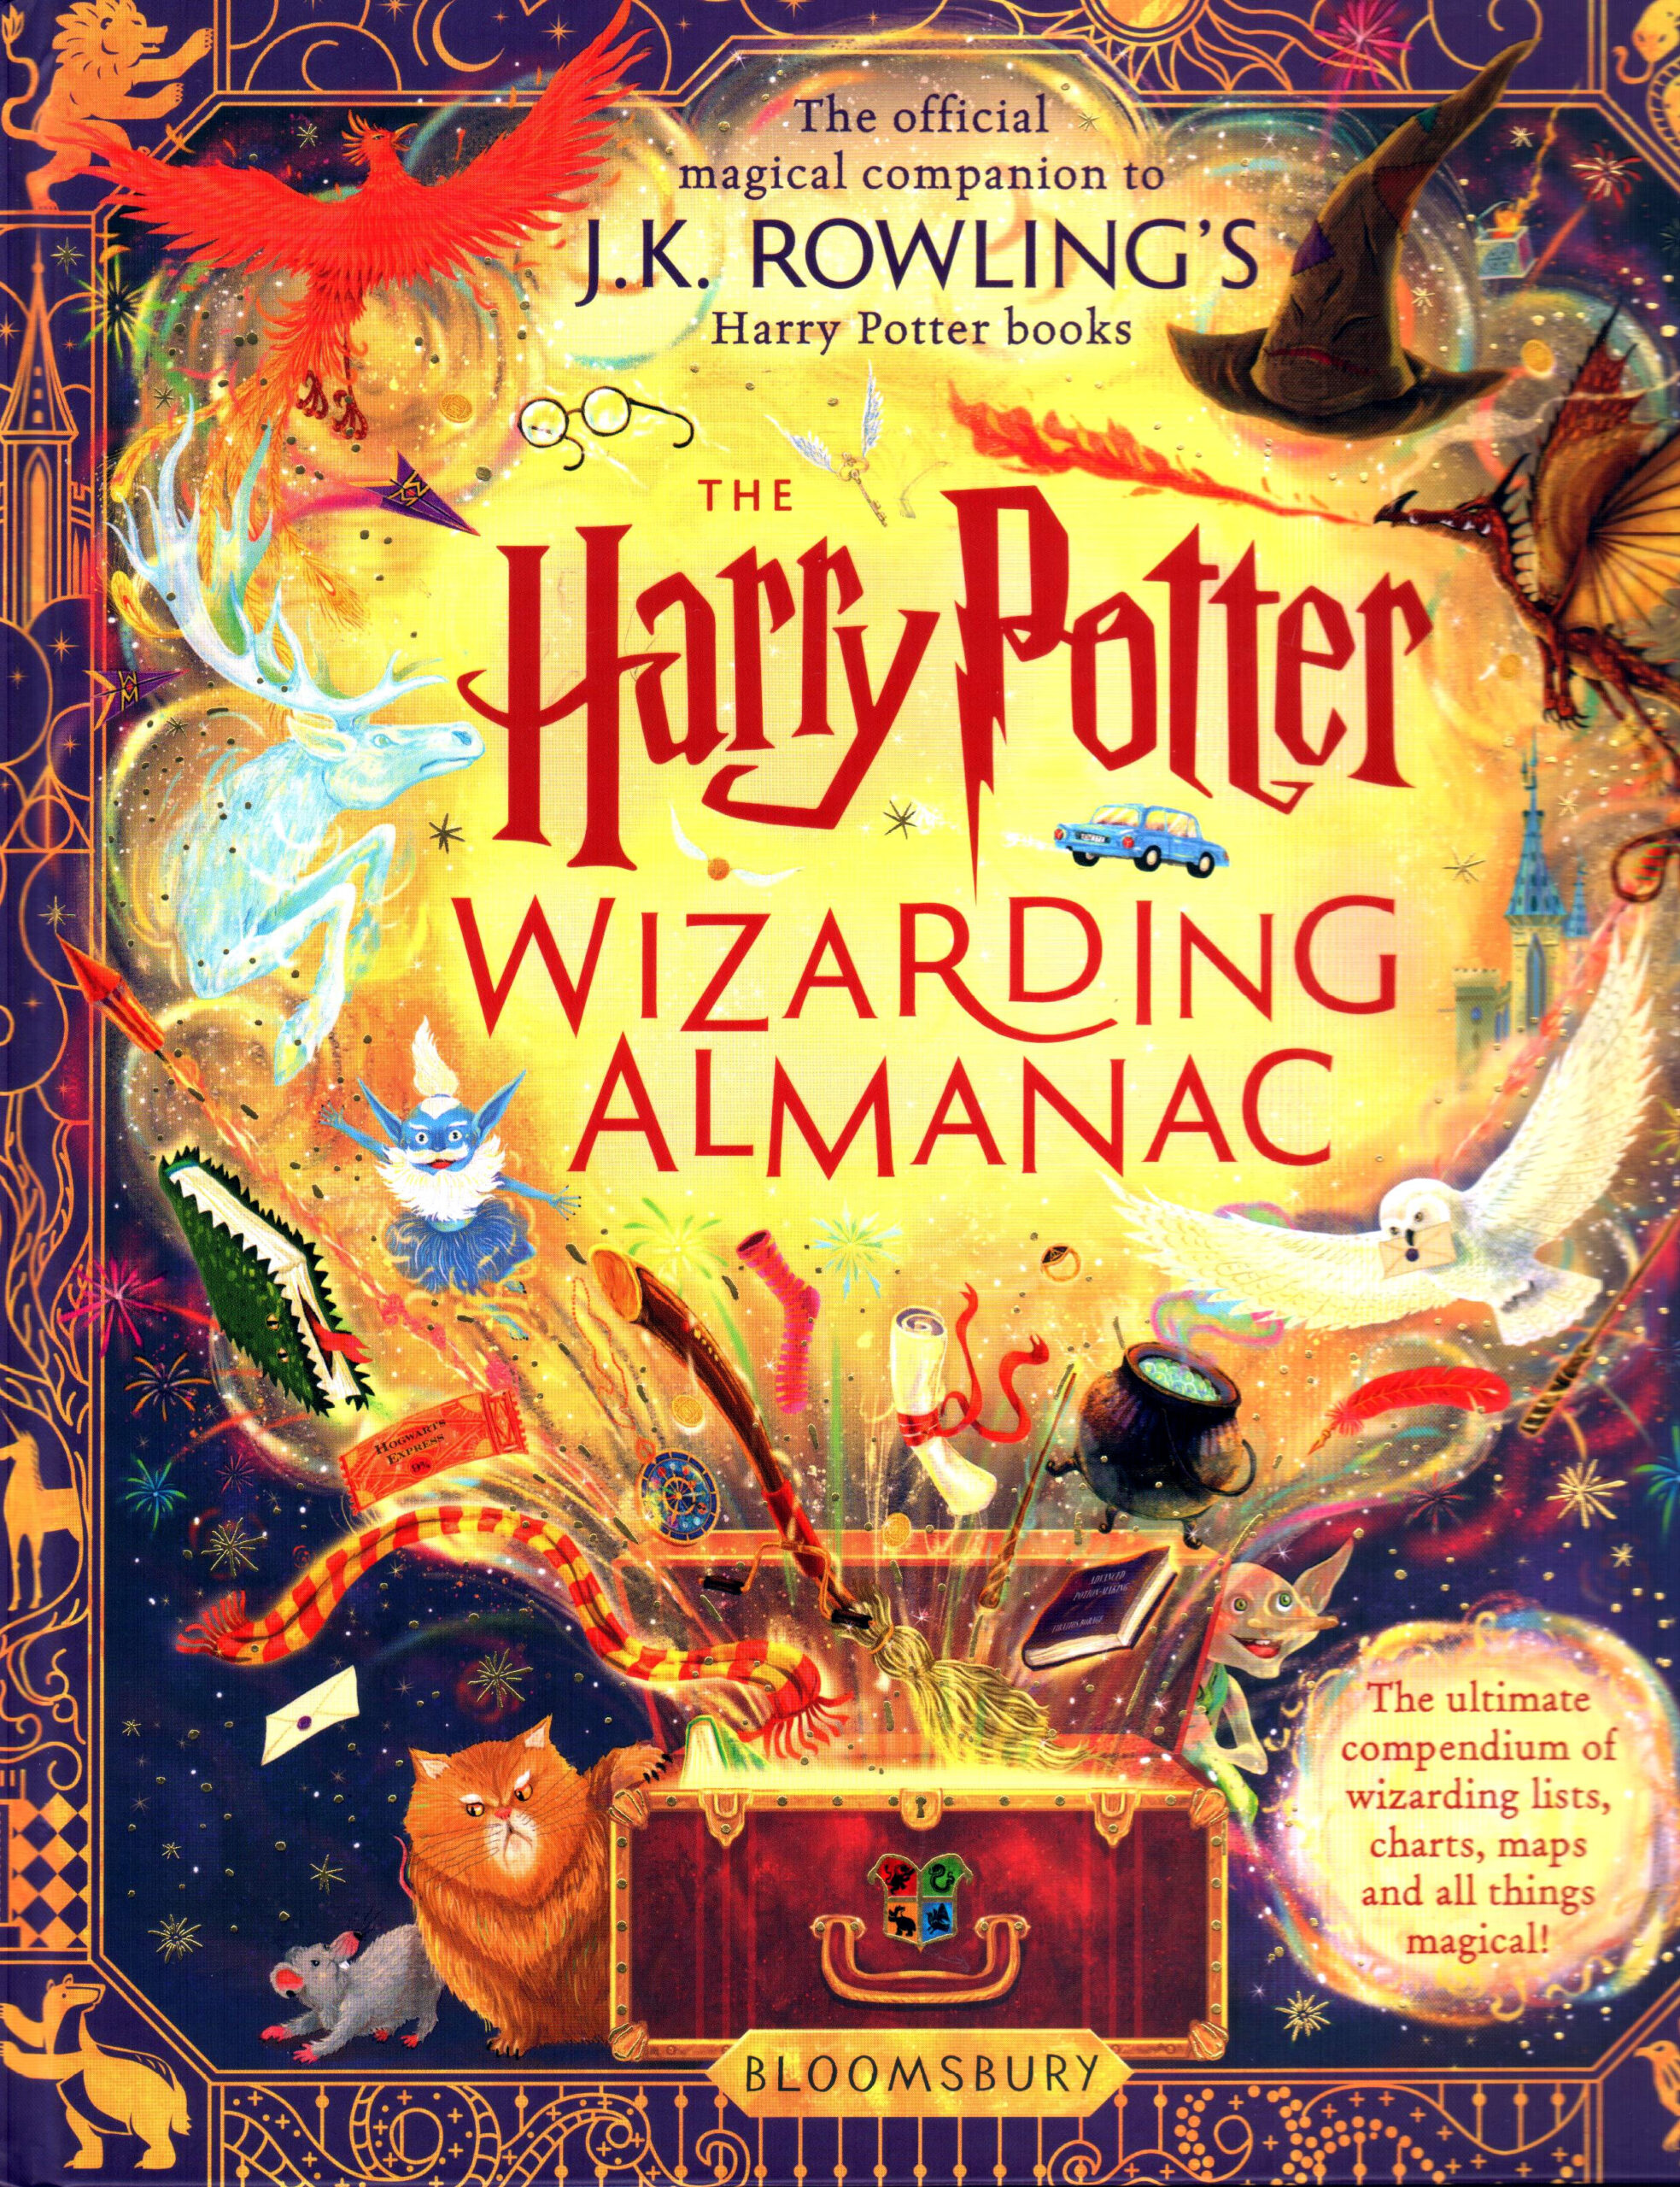 The Harry Potter Wizarding Almanac – The official magical companion to J.K. Rowling’s Harry Potter books